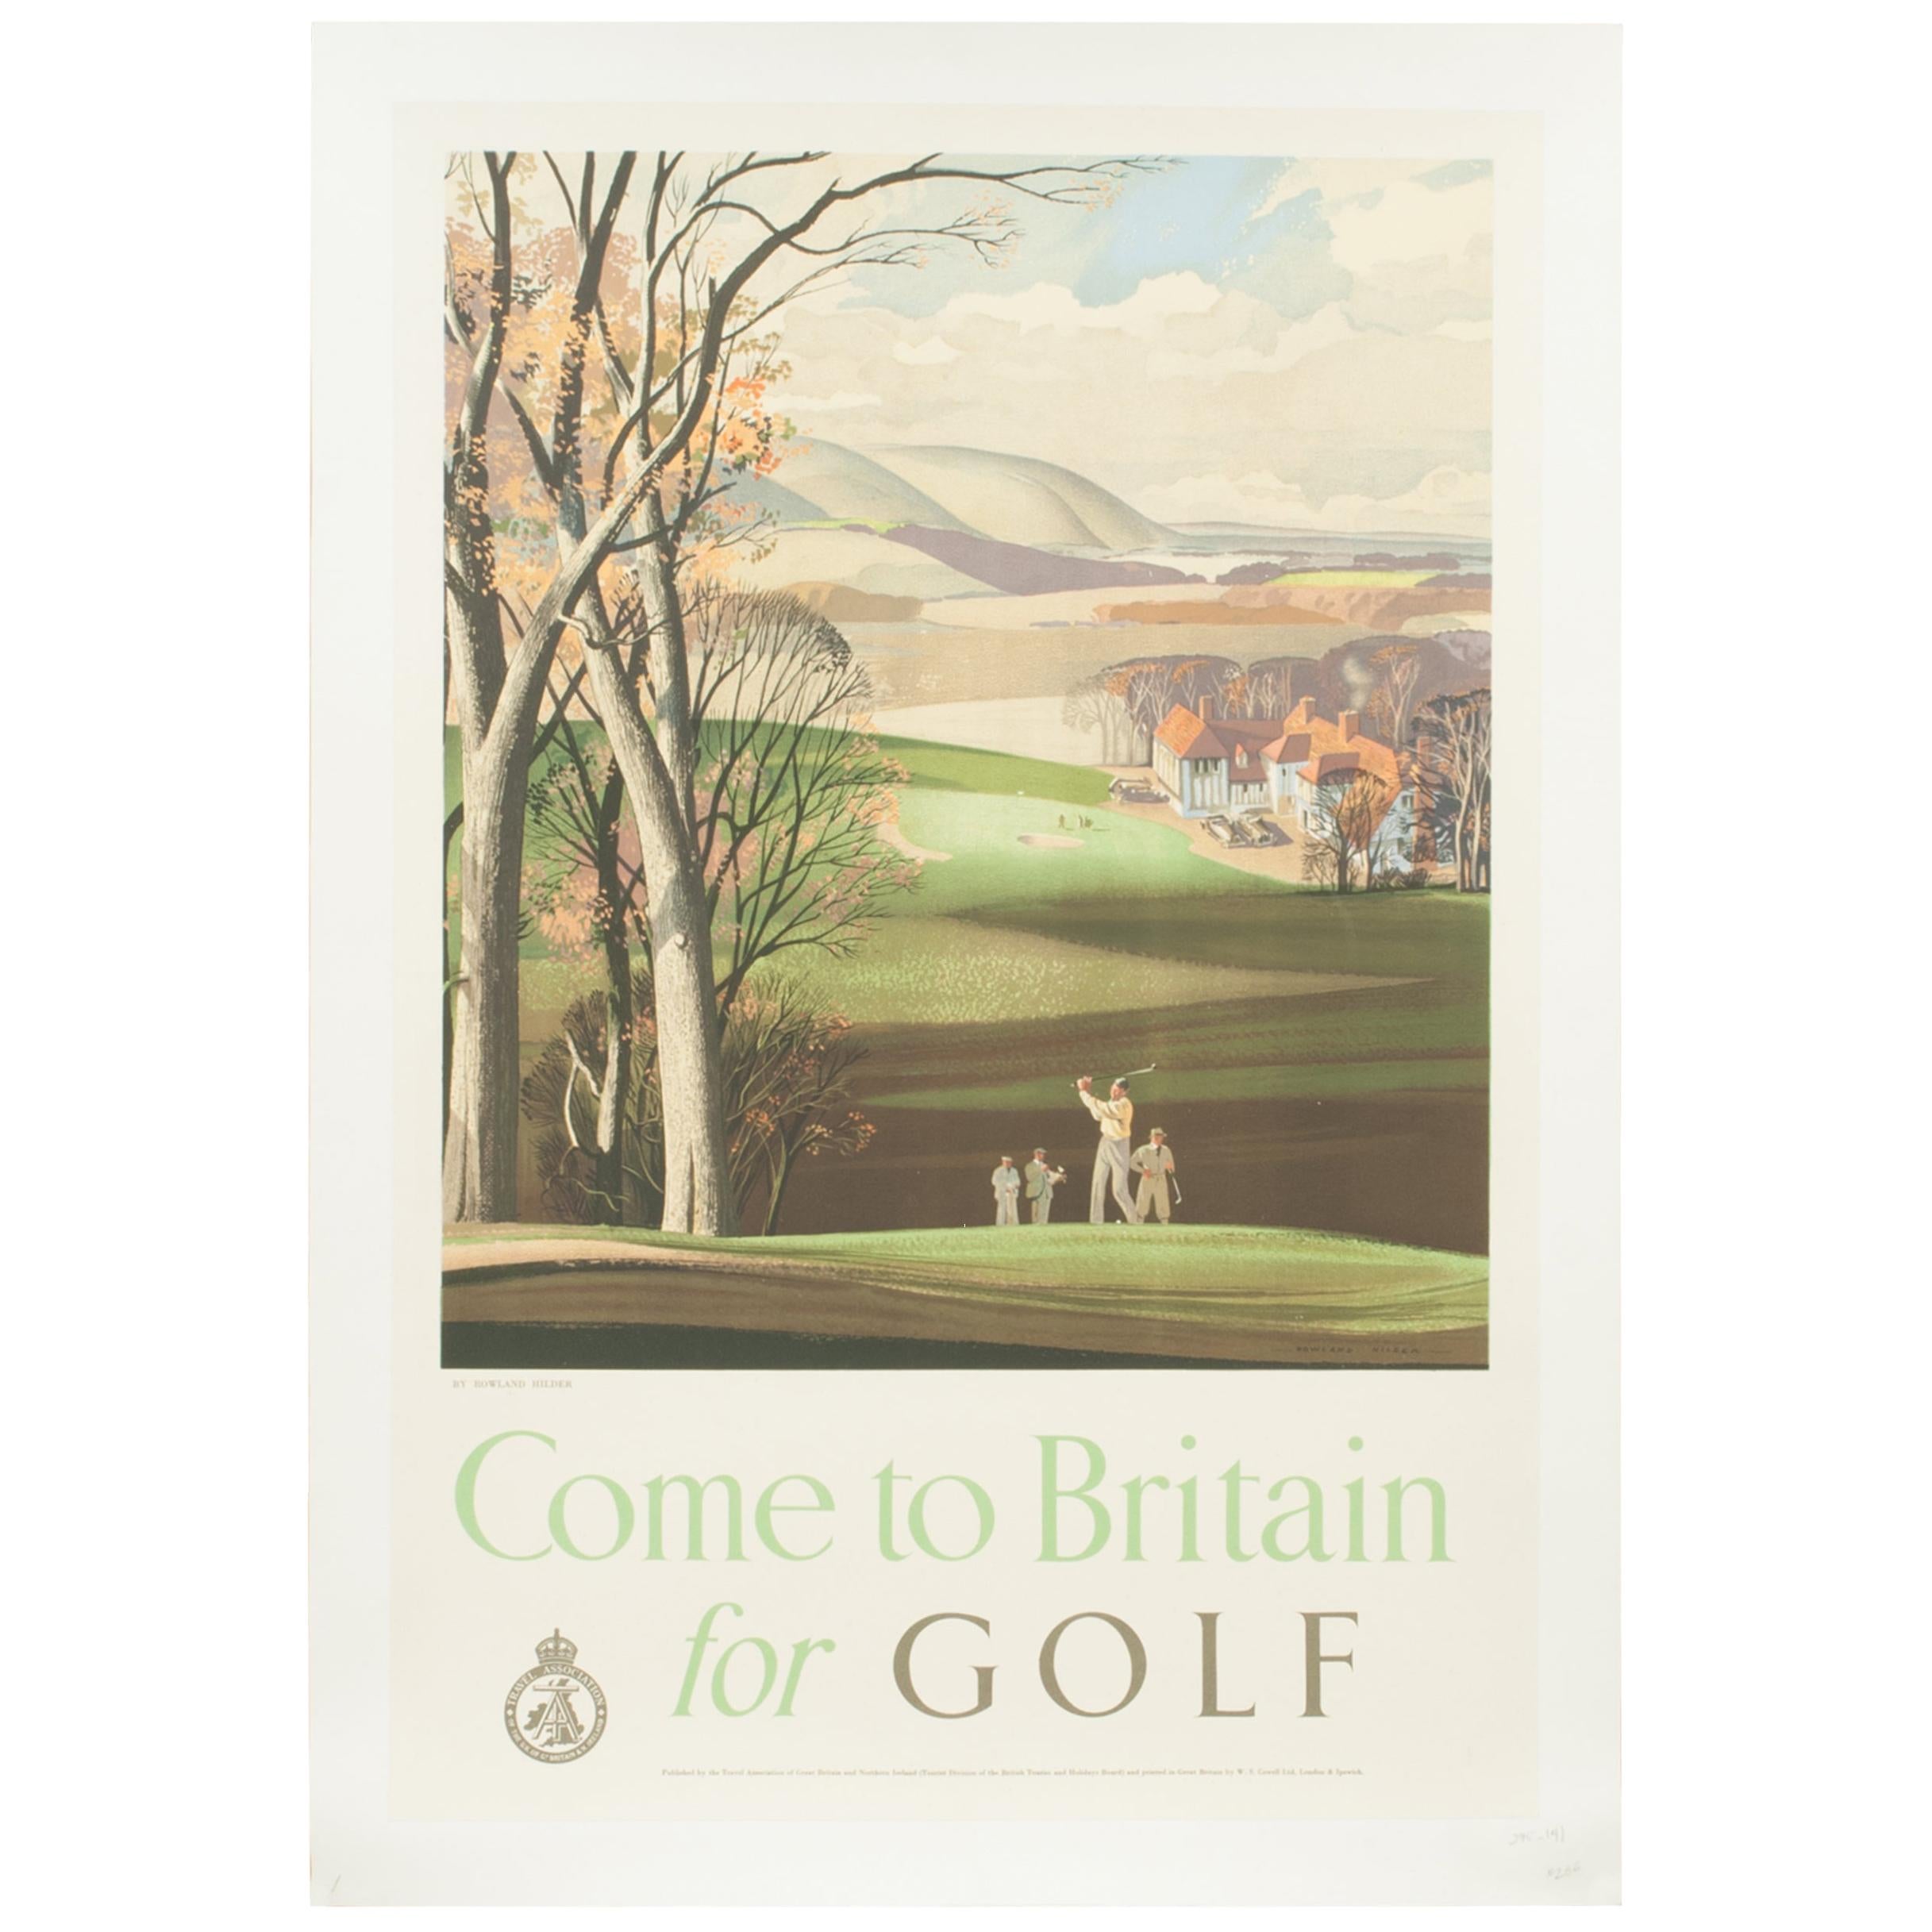 Vintage Golf Print, Come to Britain for Golf by Roland Hilder